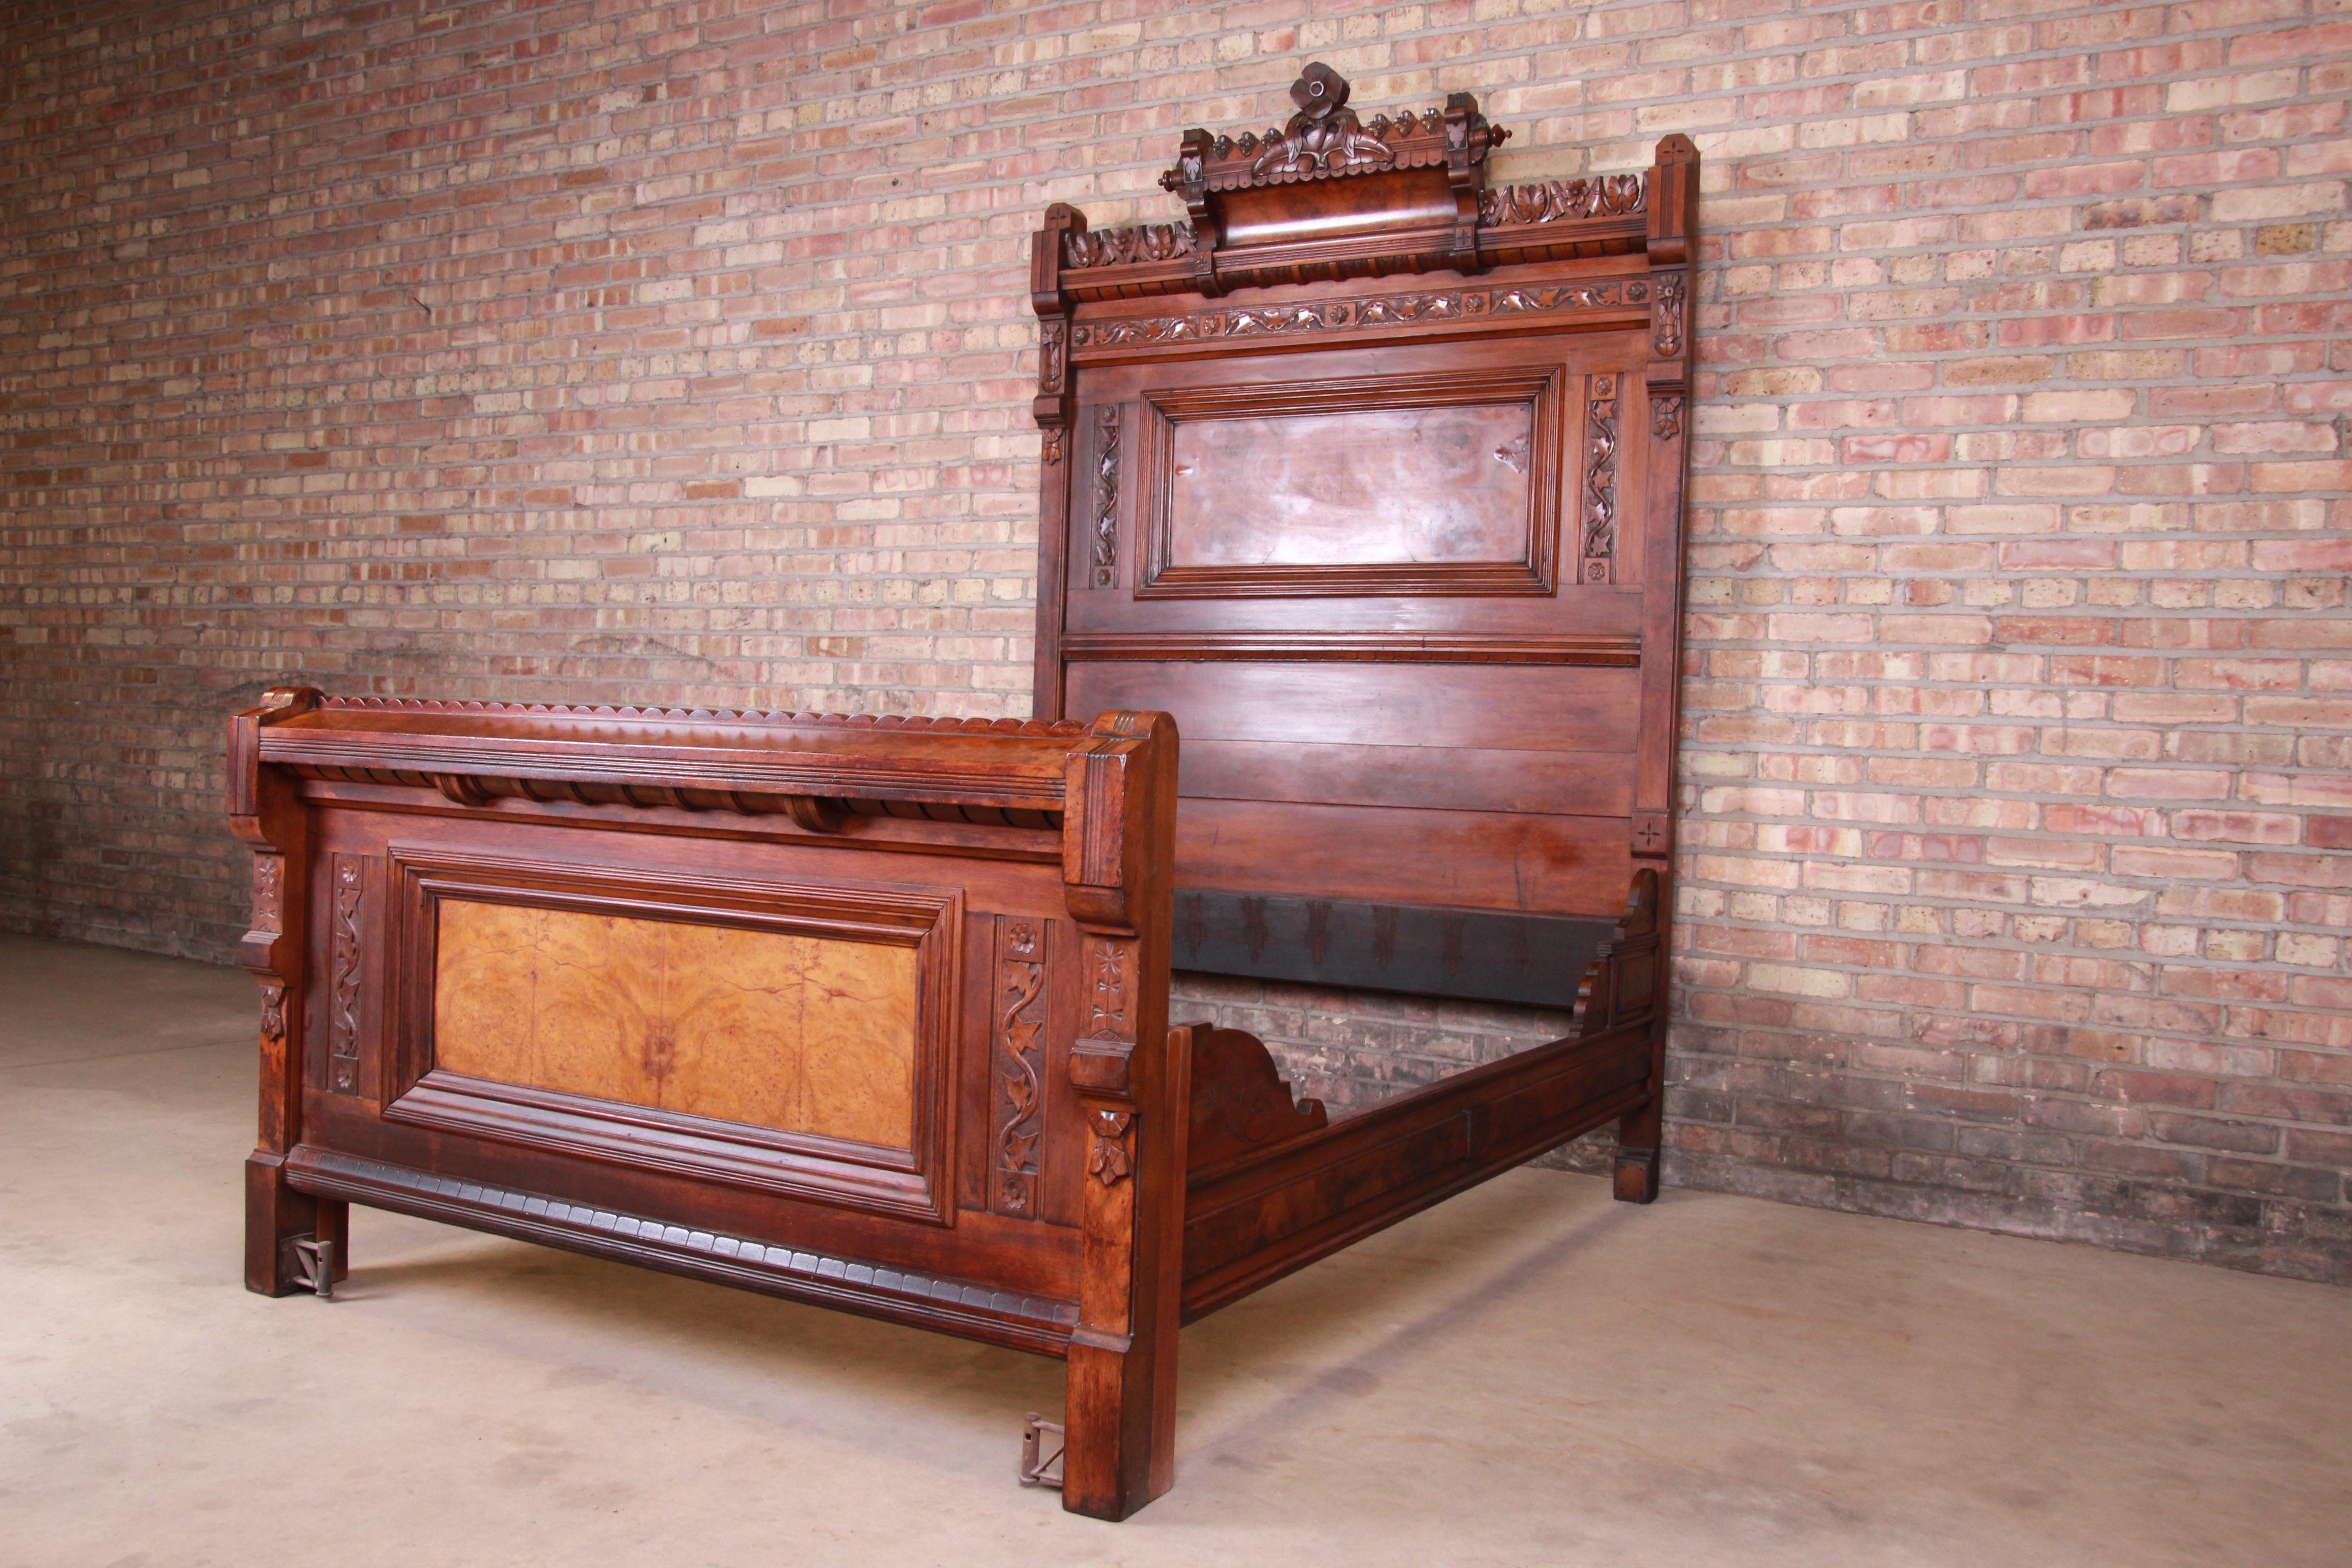 A rare and outstanding Victorian Eastlake full size bed frame

Originally purchased from Marshall Field's in Chicago, circa 1870

Ornate carved walnut and burl wood with floral motif.

Measures: 57.75